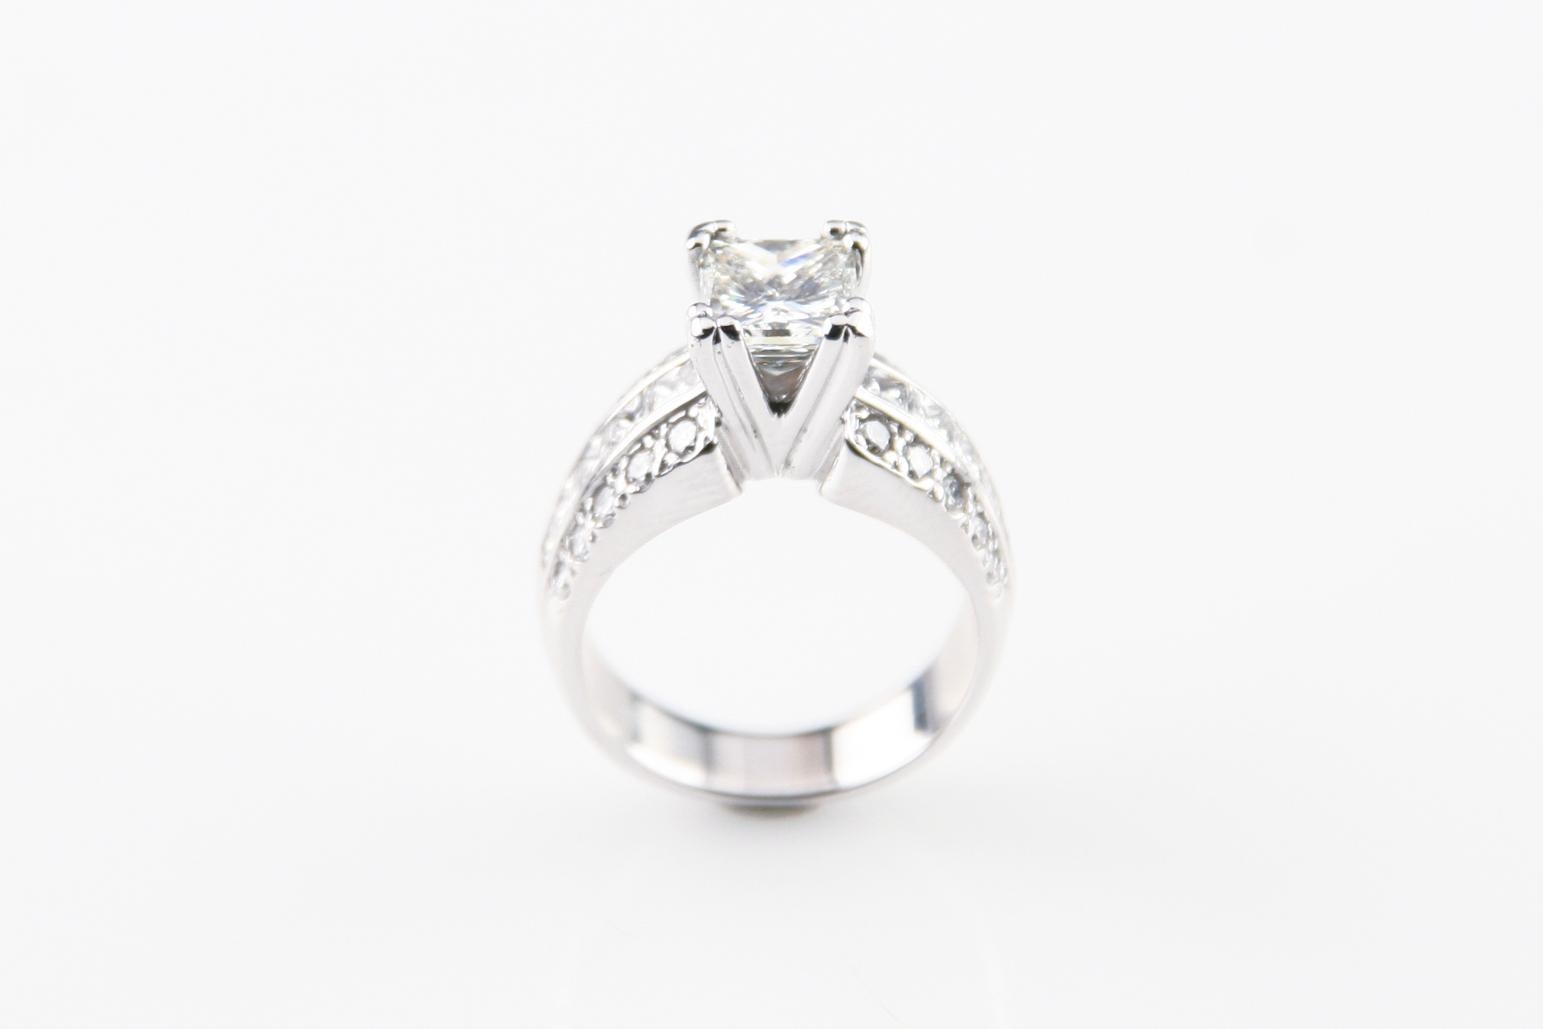 Gorgeous 14k White Gold Engagement Ring
Solitare Princess Cut Engagement Ring w/ Accent Diamonds
Ring Size = 4.5
Total Mass = 8.5 grams
TDW of Accents = Approximately 1.00 ct
Accent Stones Form 3 Rows on Either Side of the Ring
Each Row has 5